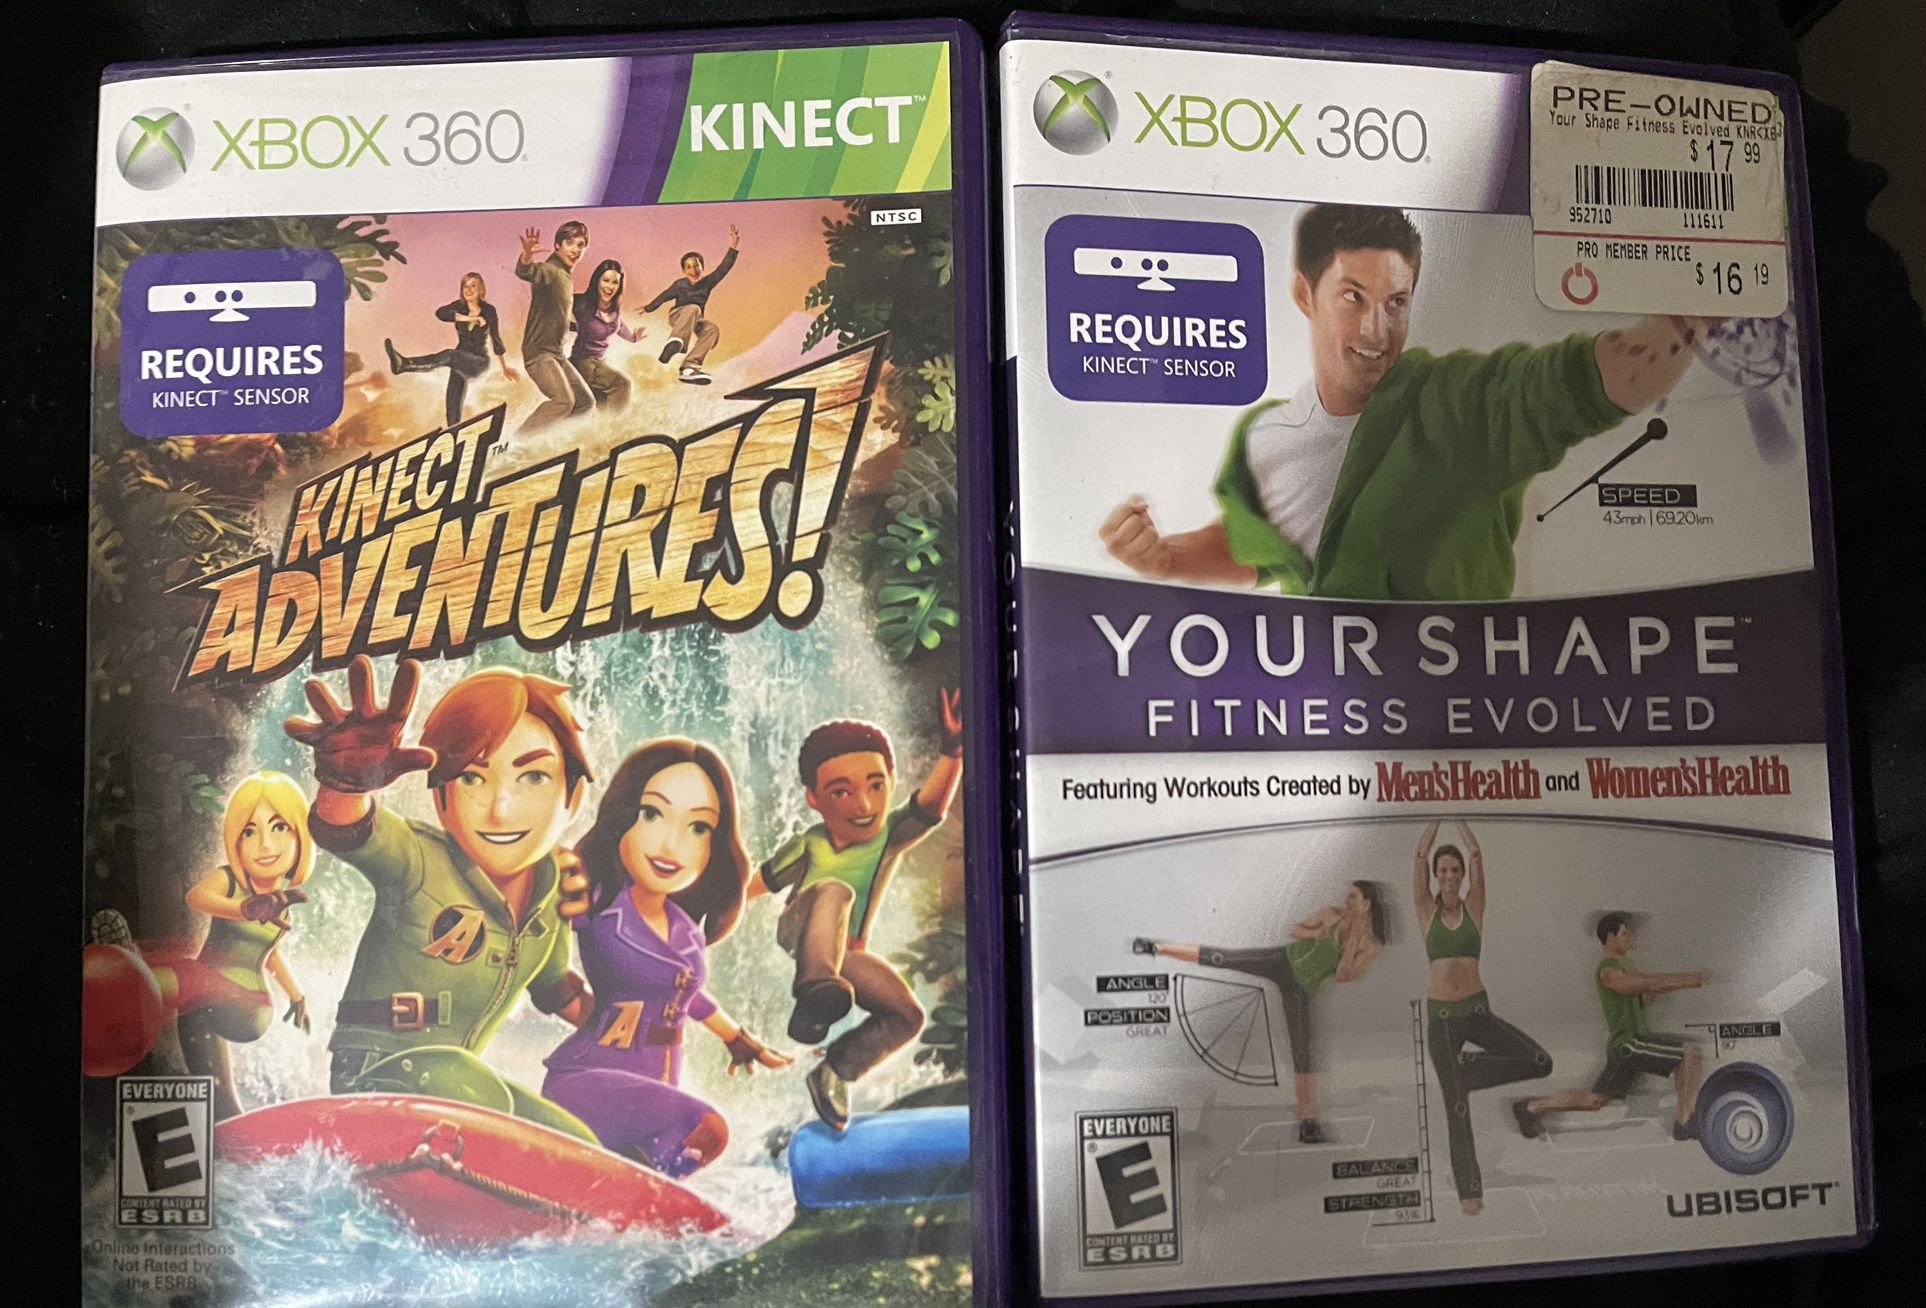 XBox 360 Kinect Game And Fitness DVDs